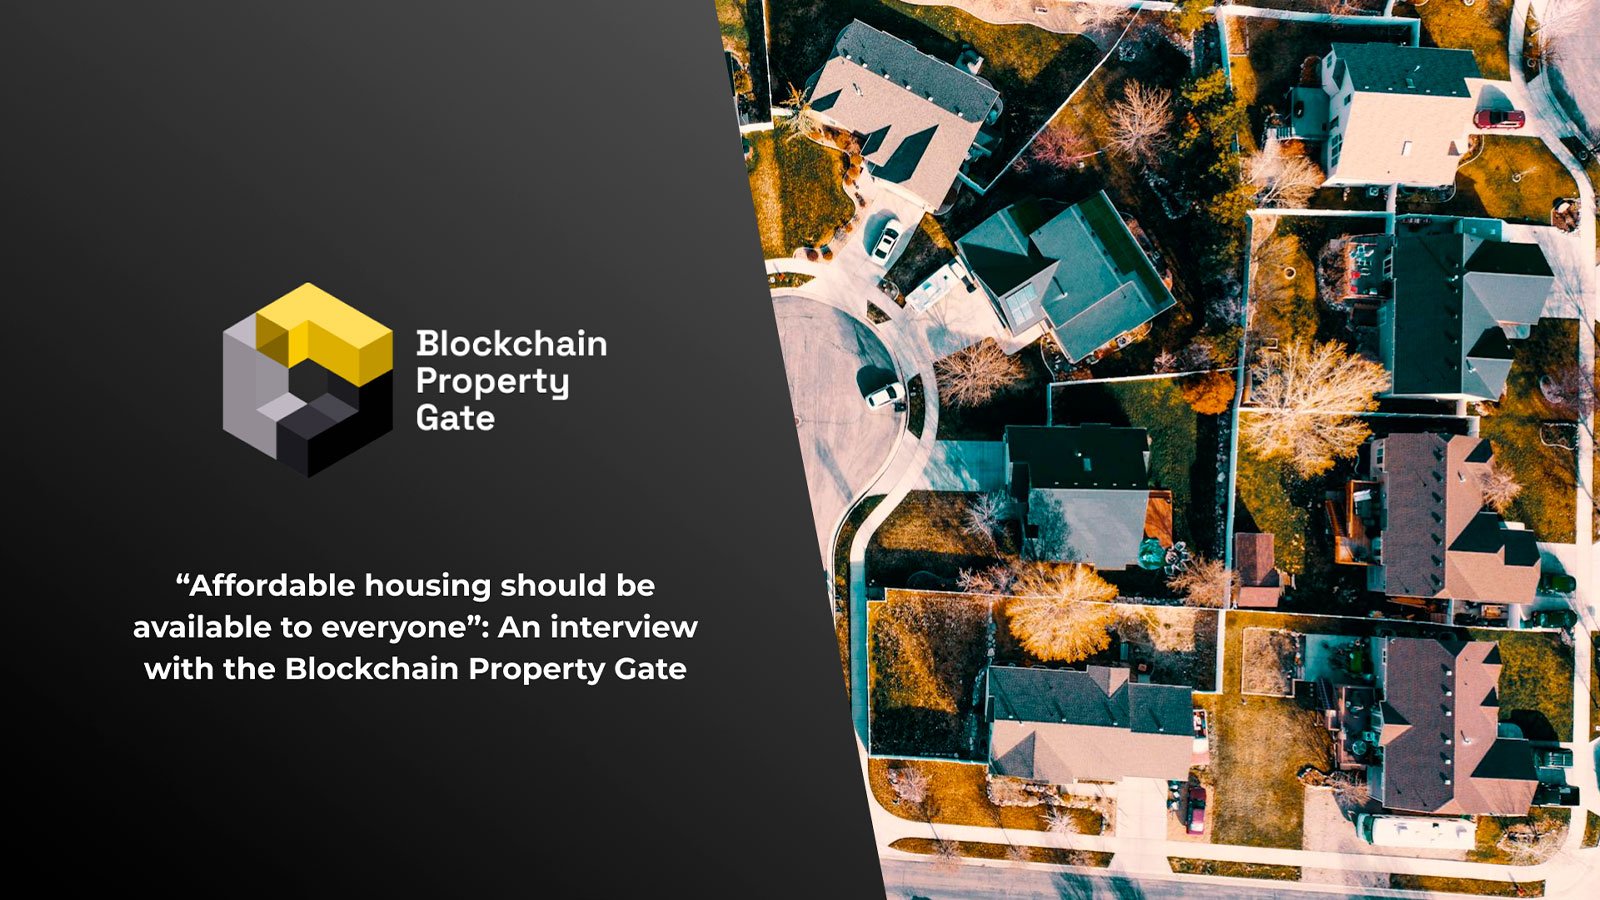 “Affordable Housing Should Be Available to Everyone”: An Interview With the Blockchain Property Gate